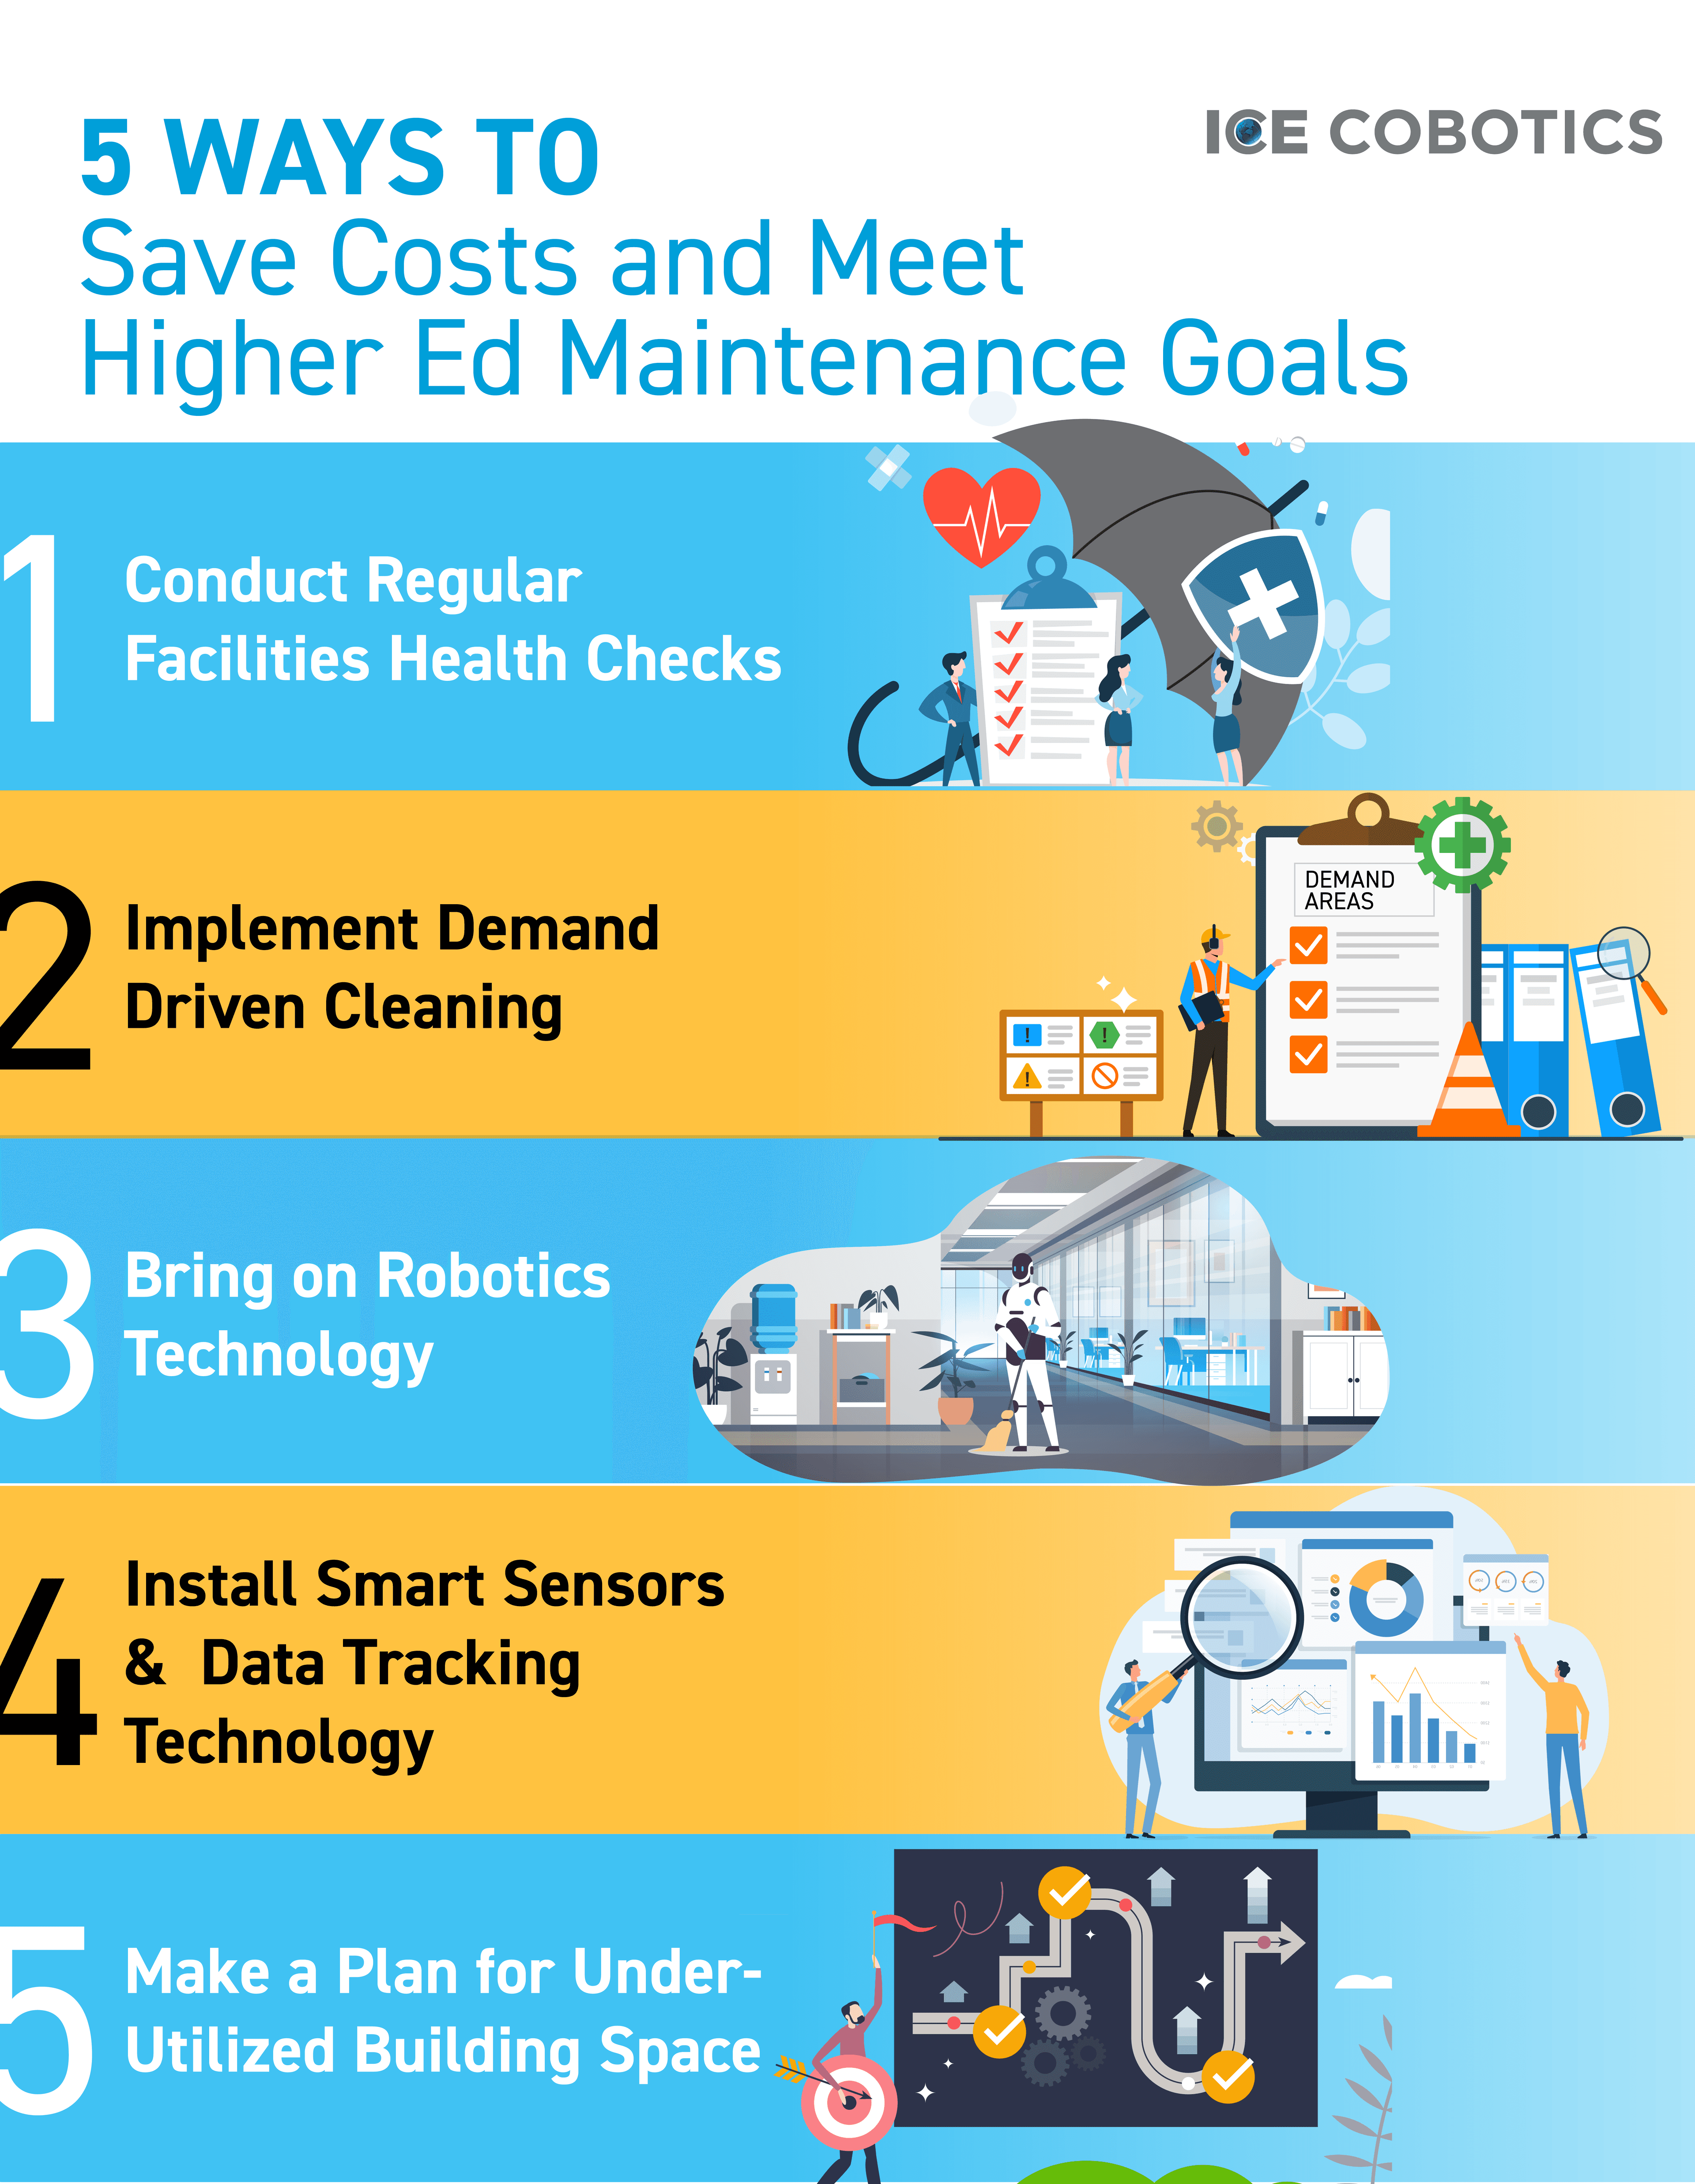 5 Wayst to Save Costs and Meet Higher Ed Mainteance Goals Infographic